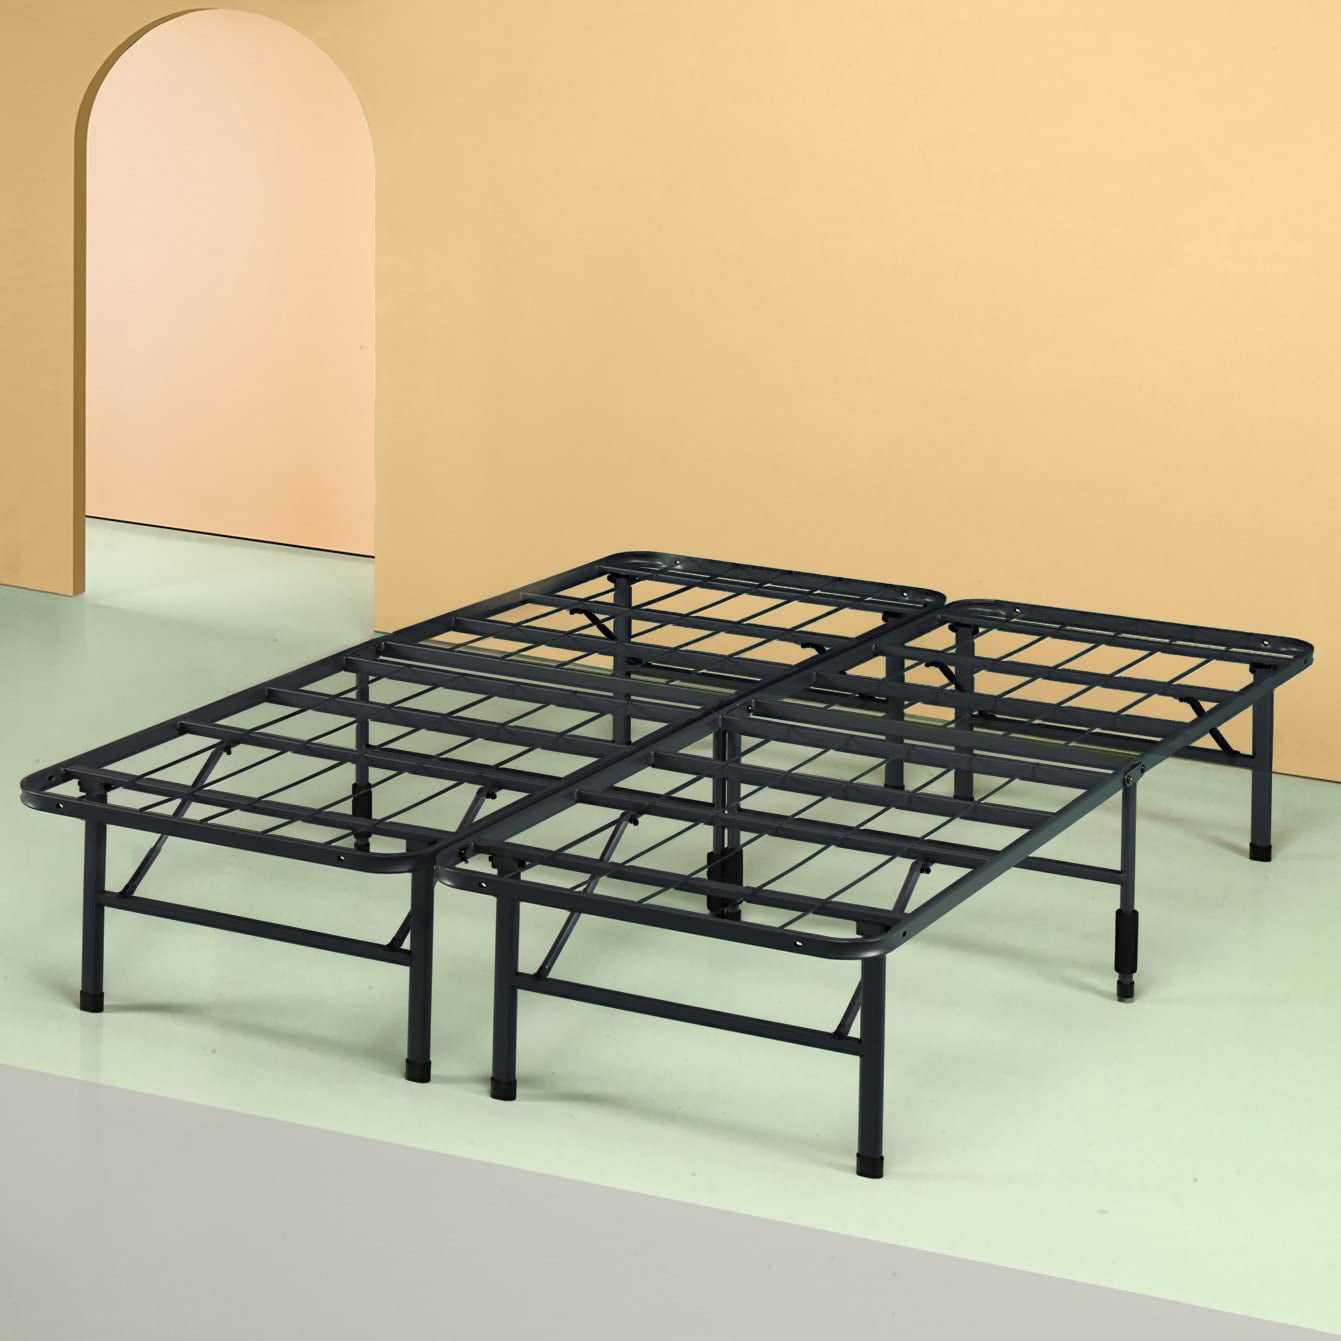 14 Inch Full Size Mattress Foundation Platform Bed Frame/Box Spring Replacement 